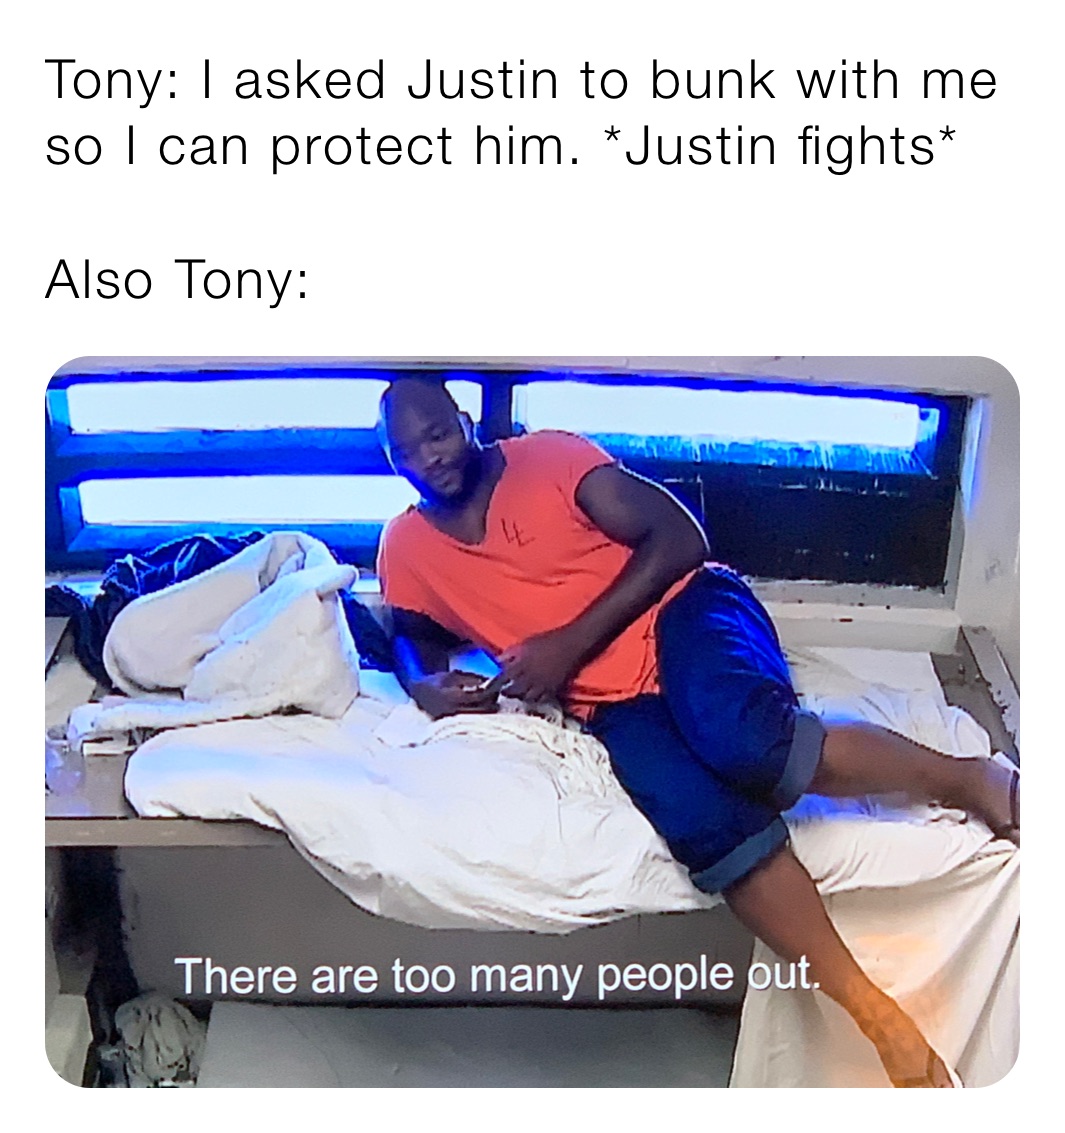 Tony: I asked Justin to bunk with me so I can protect him. *Justin fights*

Also Tony: